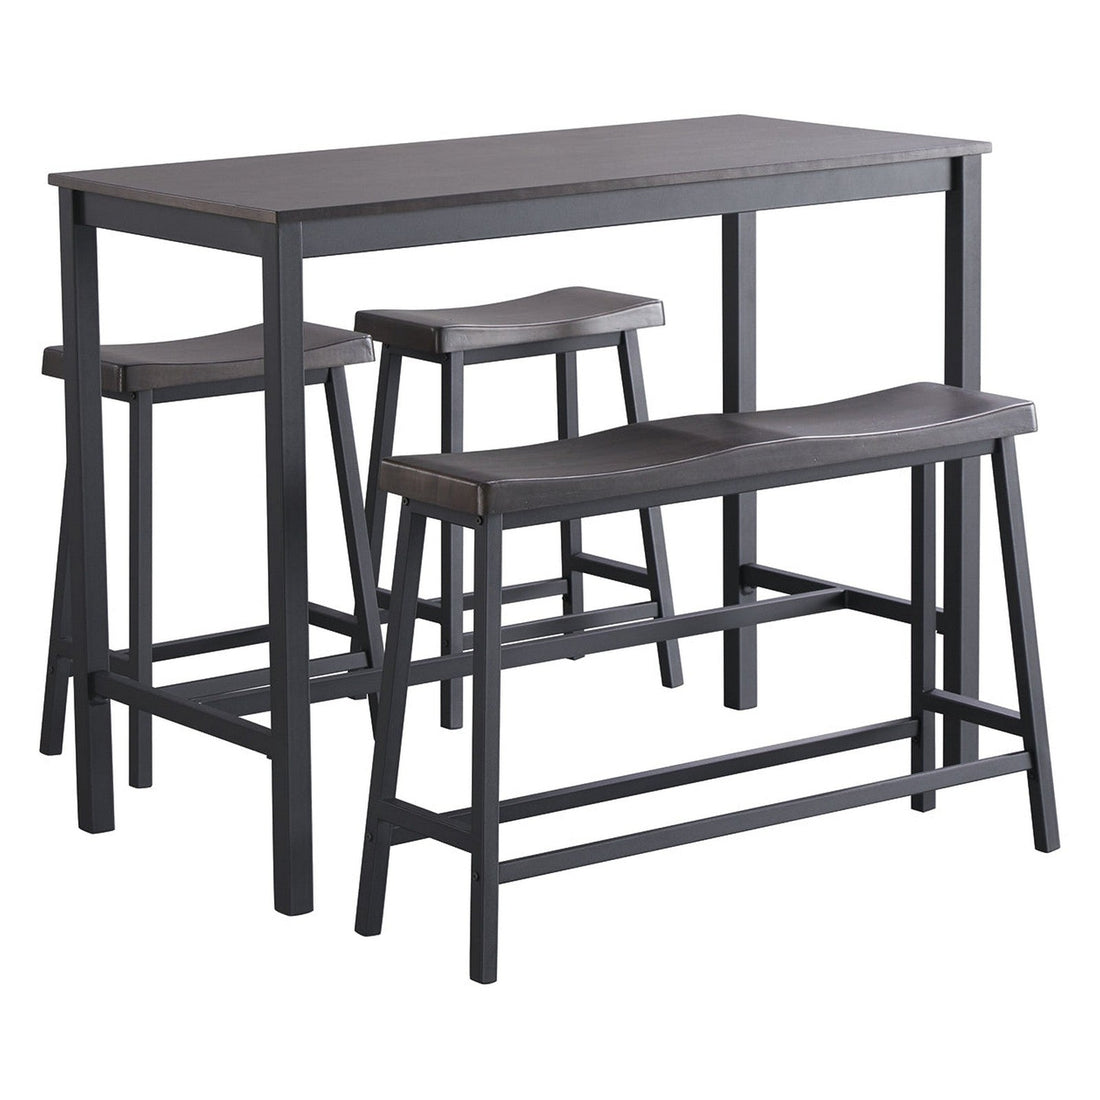 Playden Counter Height Dining Table and Bar Stools (Set of 4) Ash-D231-233